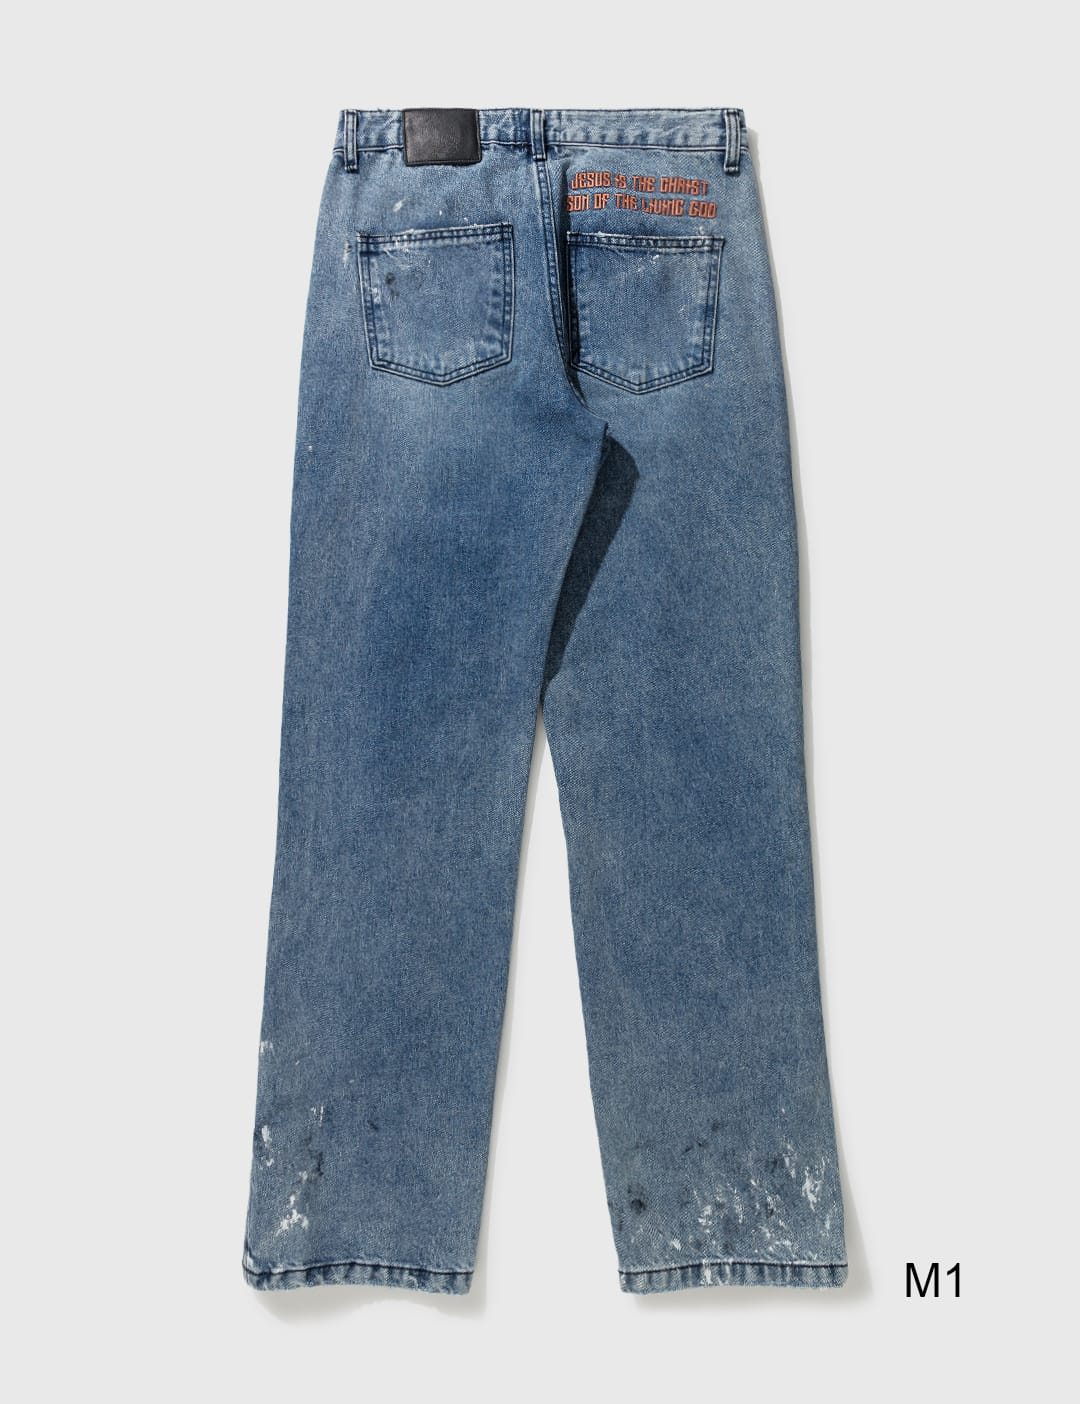 Someit - S.O.G Vintage Denim Pants | HBX - Globally Curated